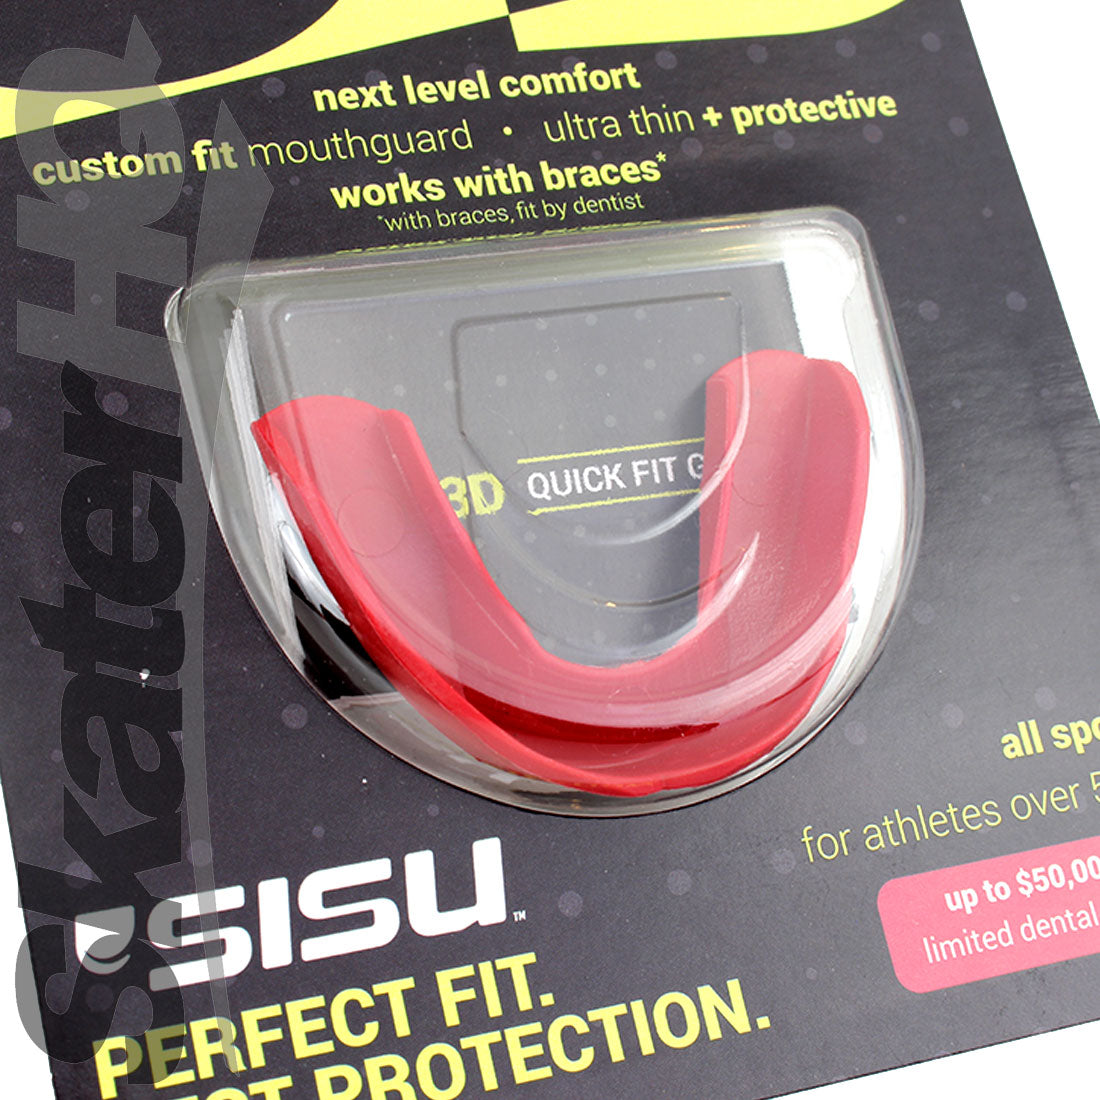 SISU 3D Adult Mouthguard - Intense Red Protective Mouthguards